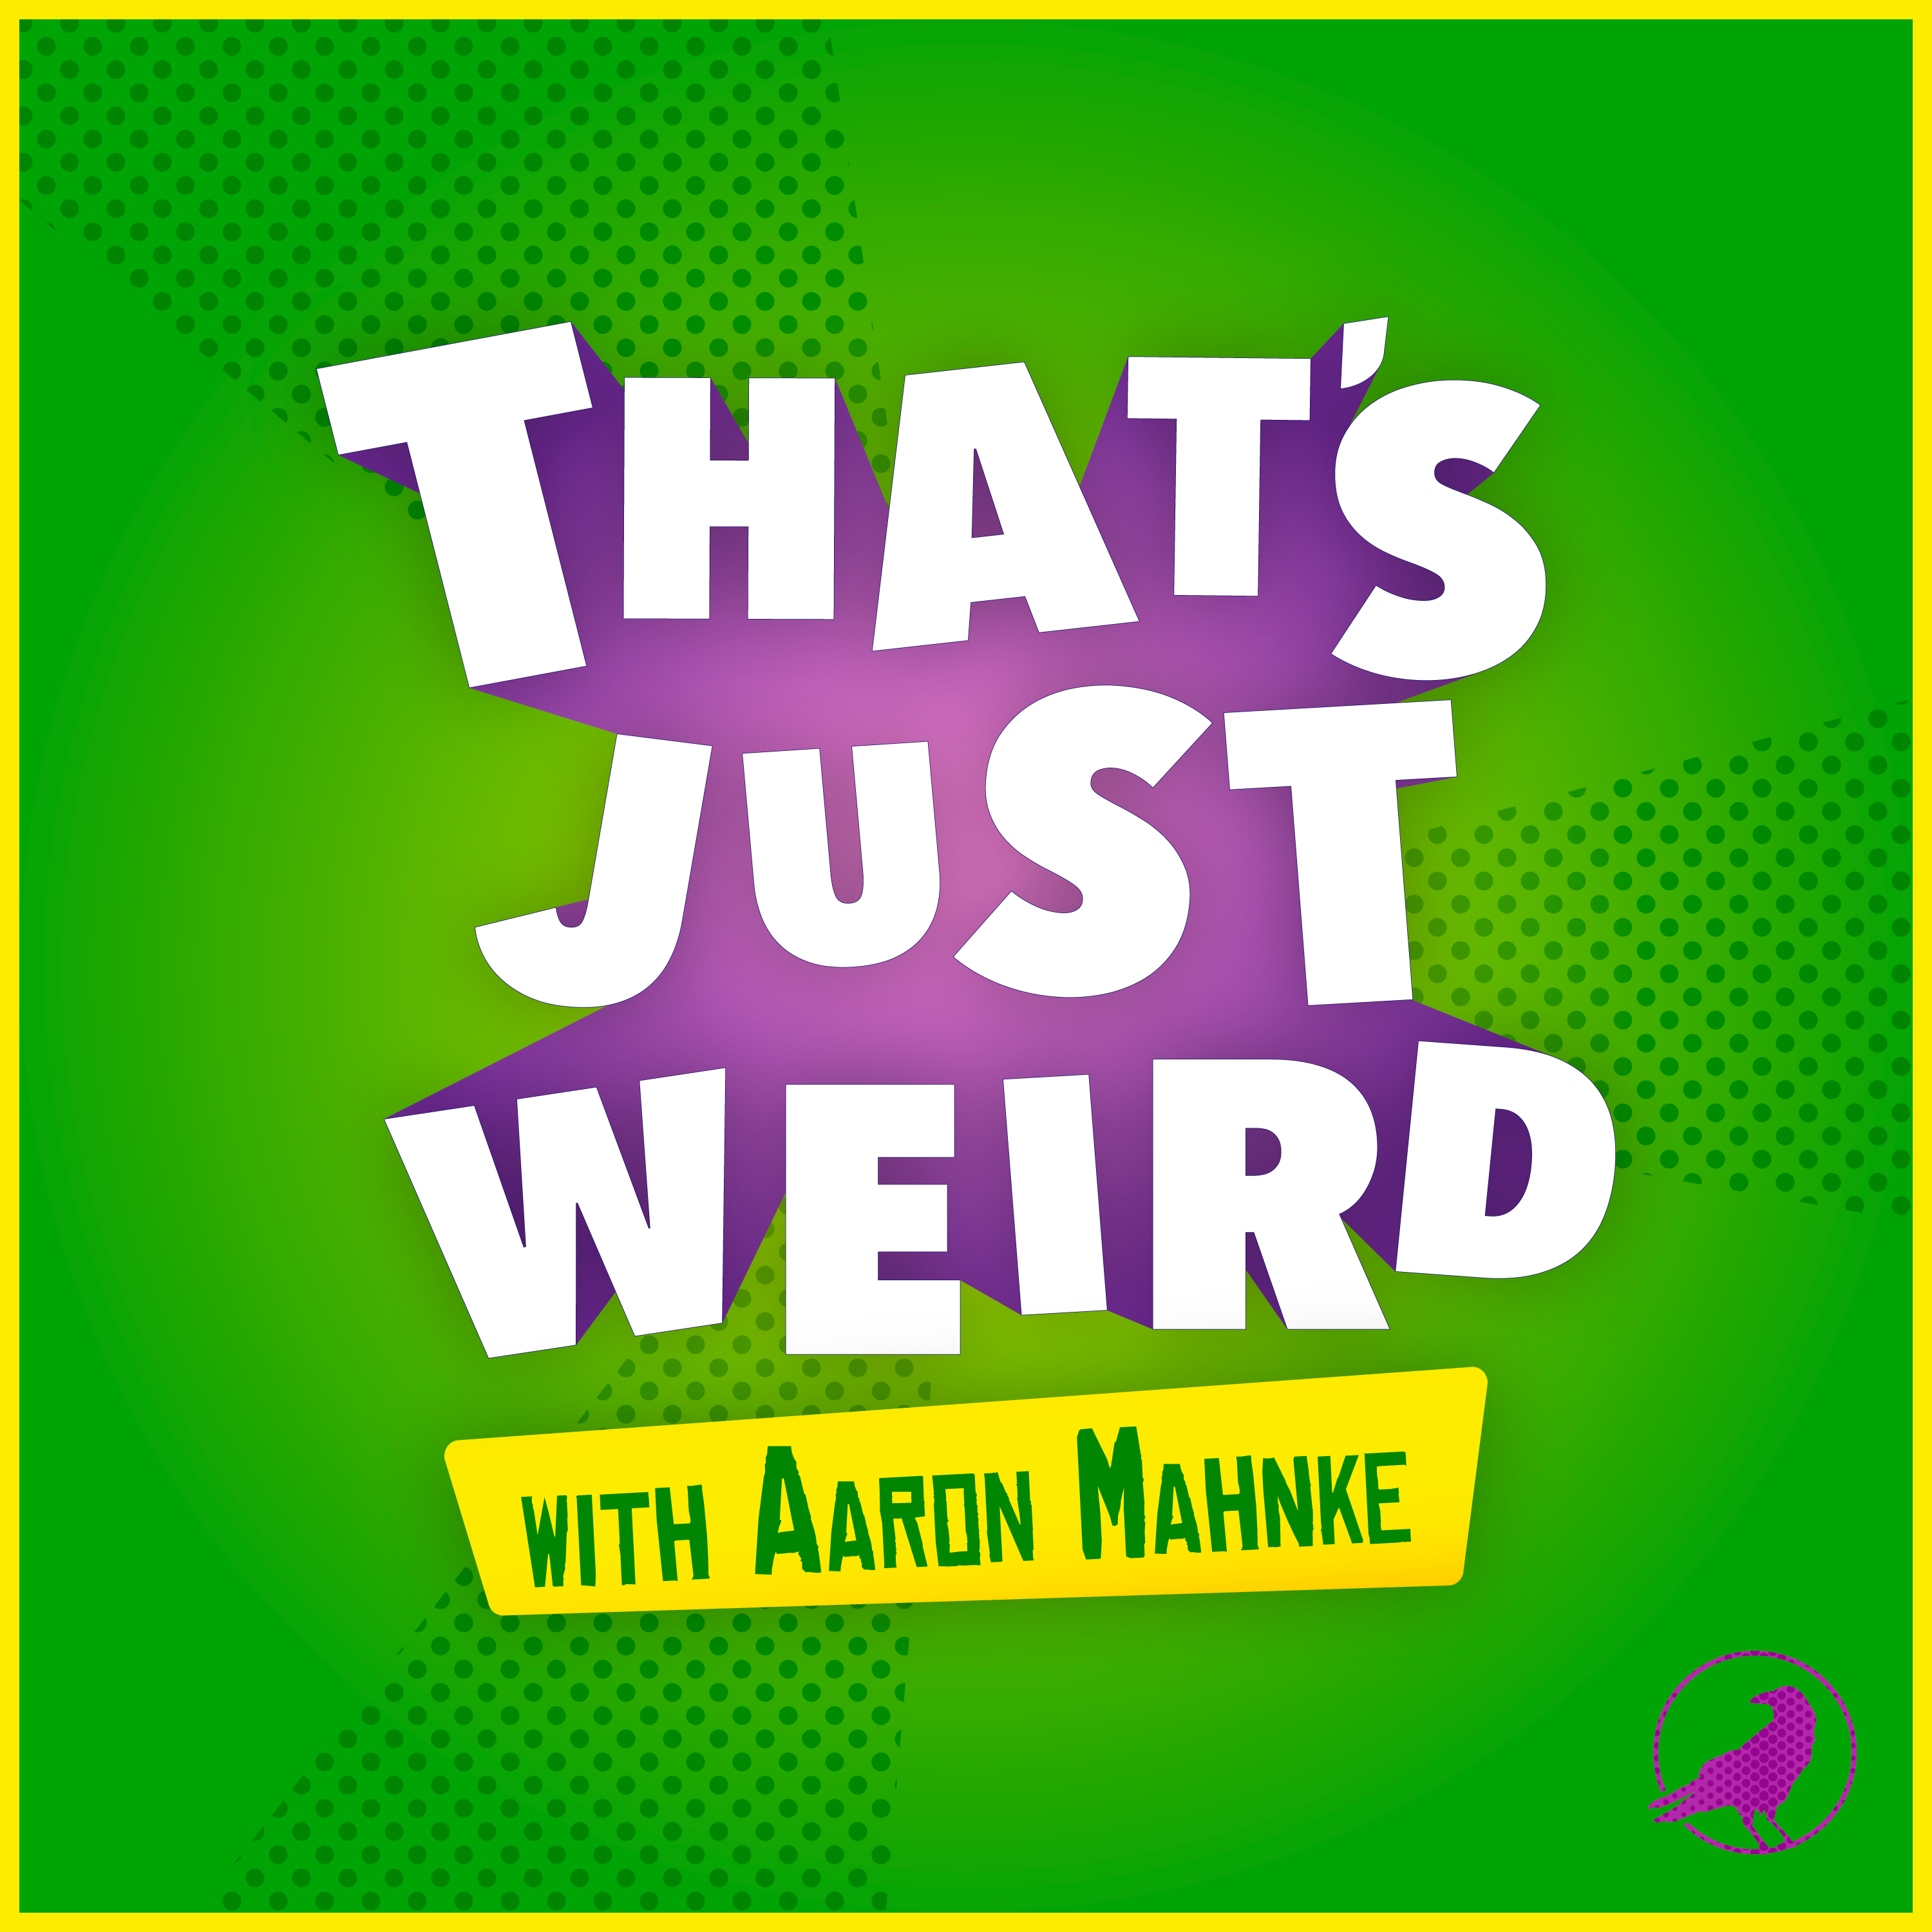 TRAILER: That's Just Weird with Aaron Mahnke